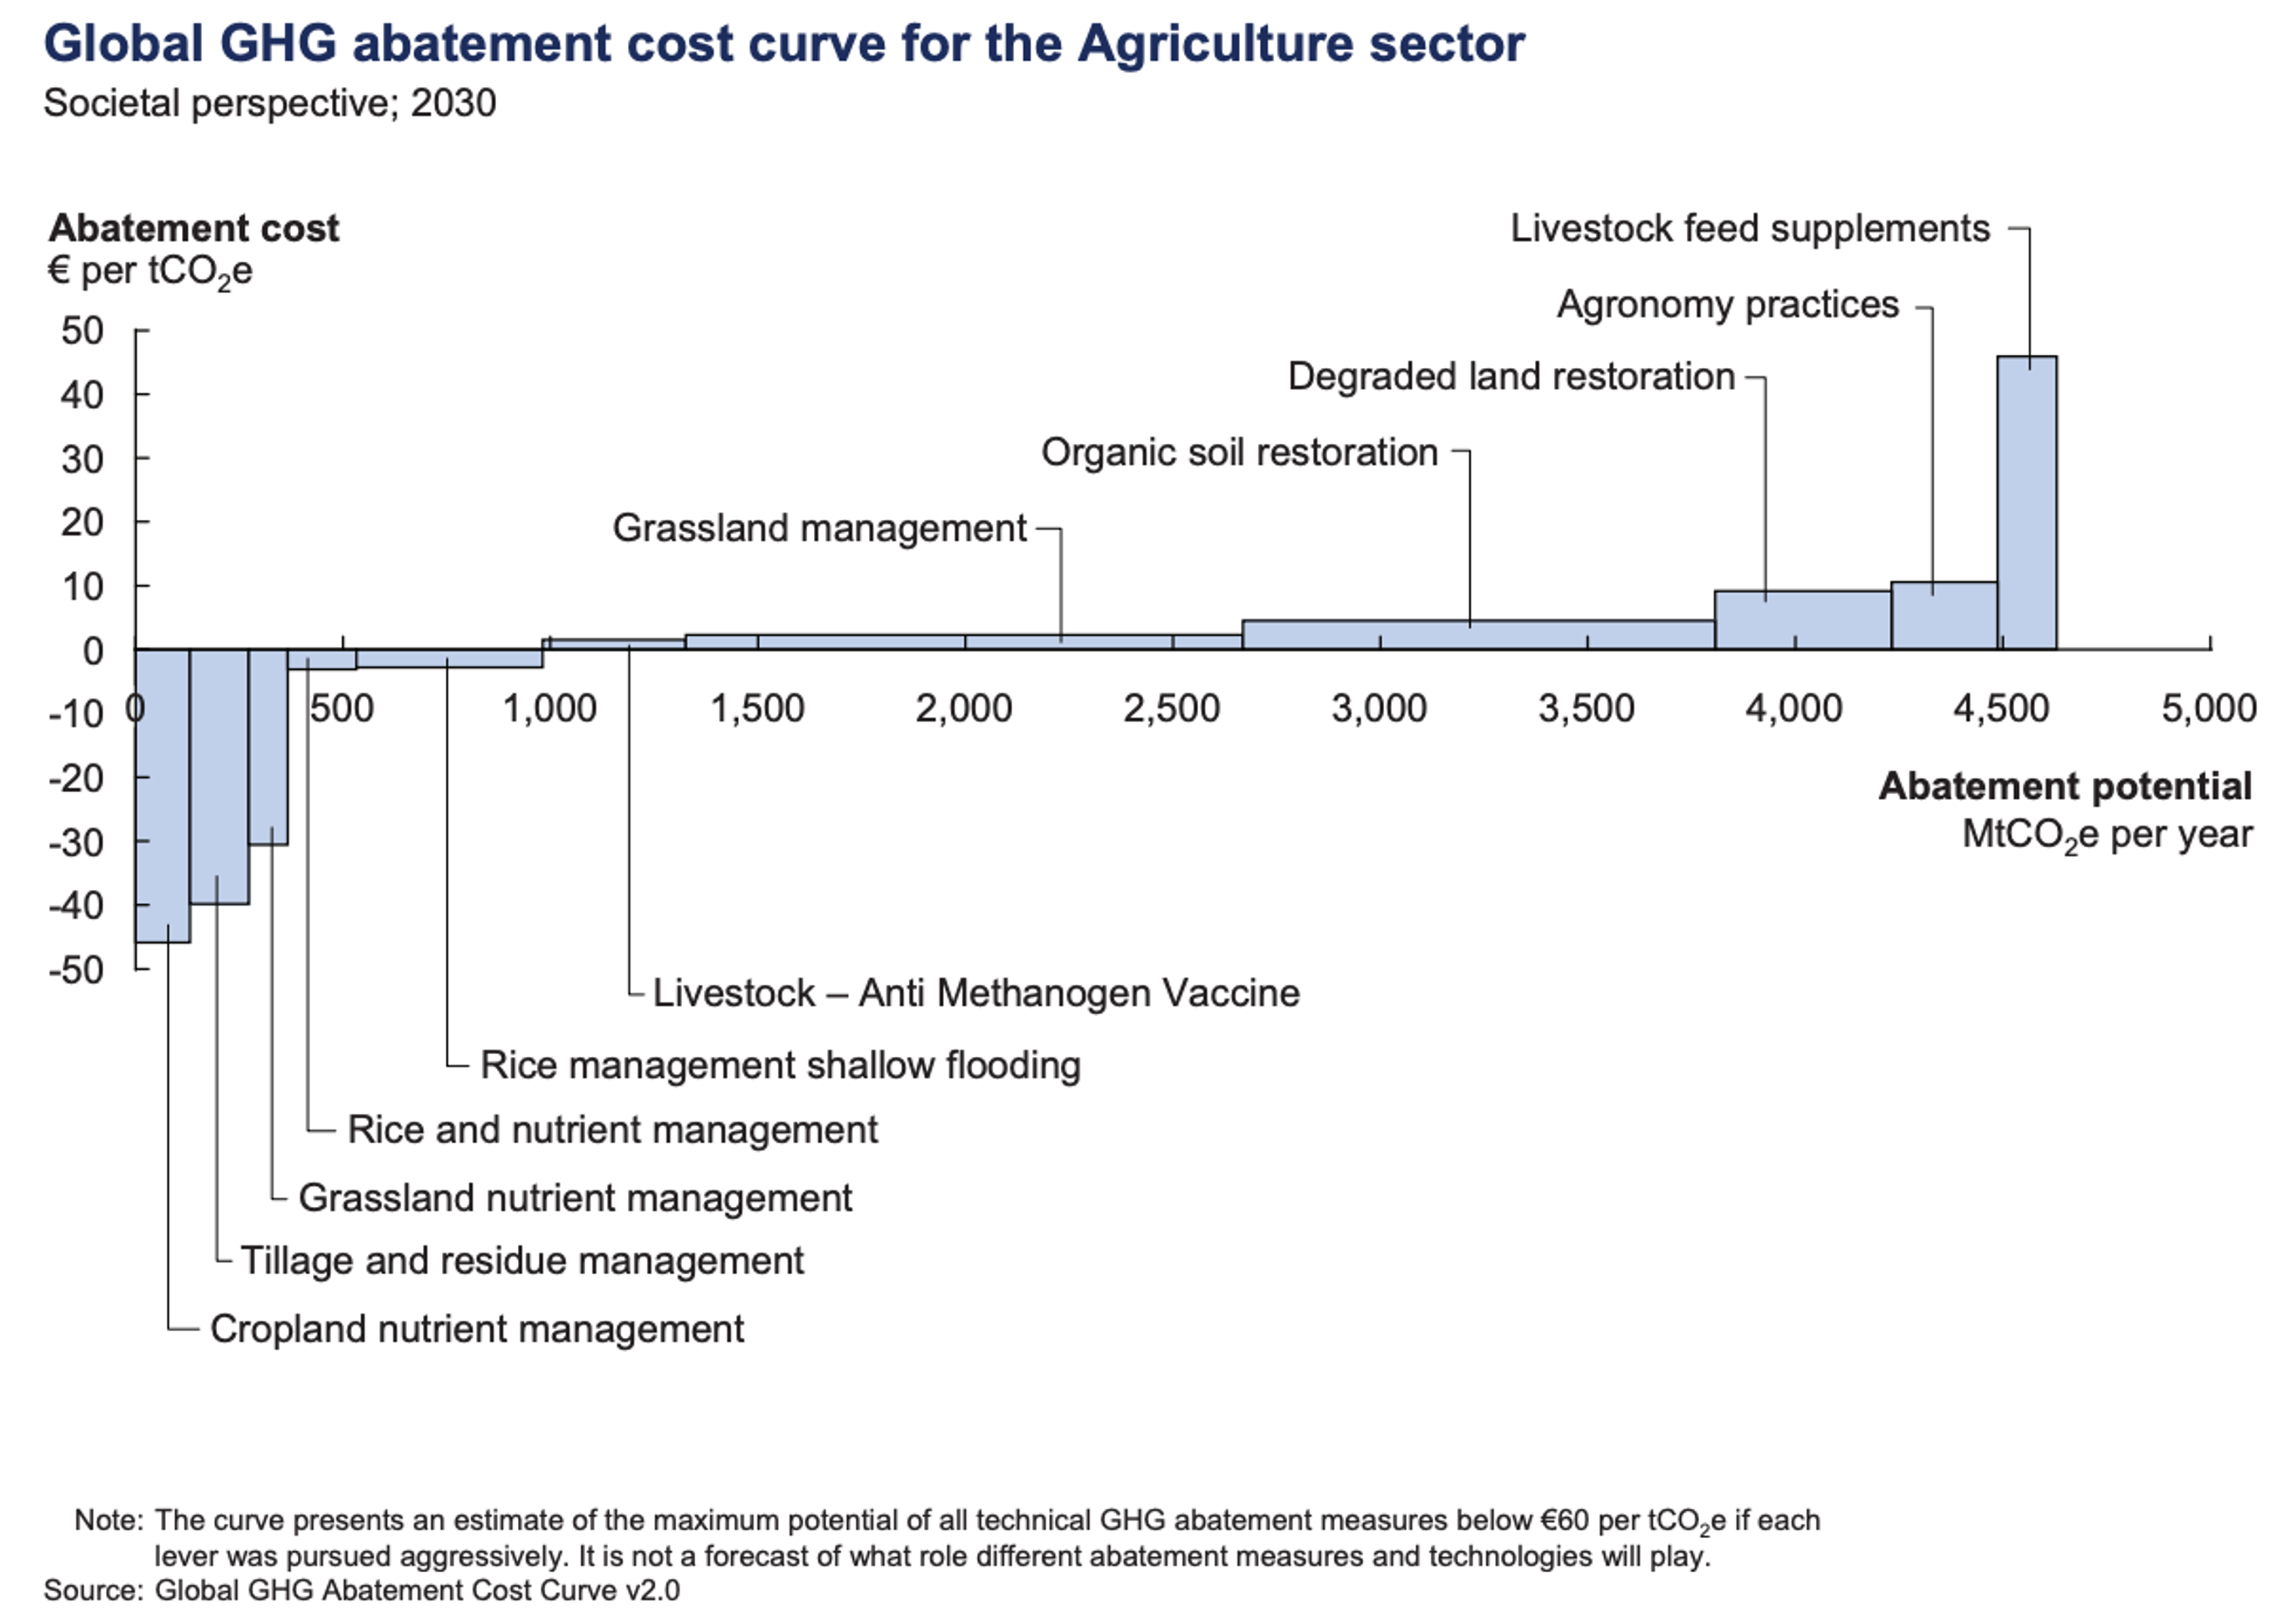 Global GHG abatement cost curve for the agriculture sector